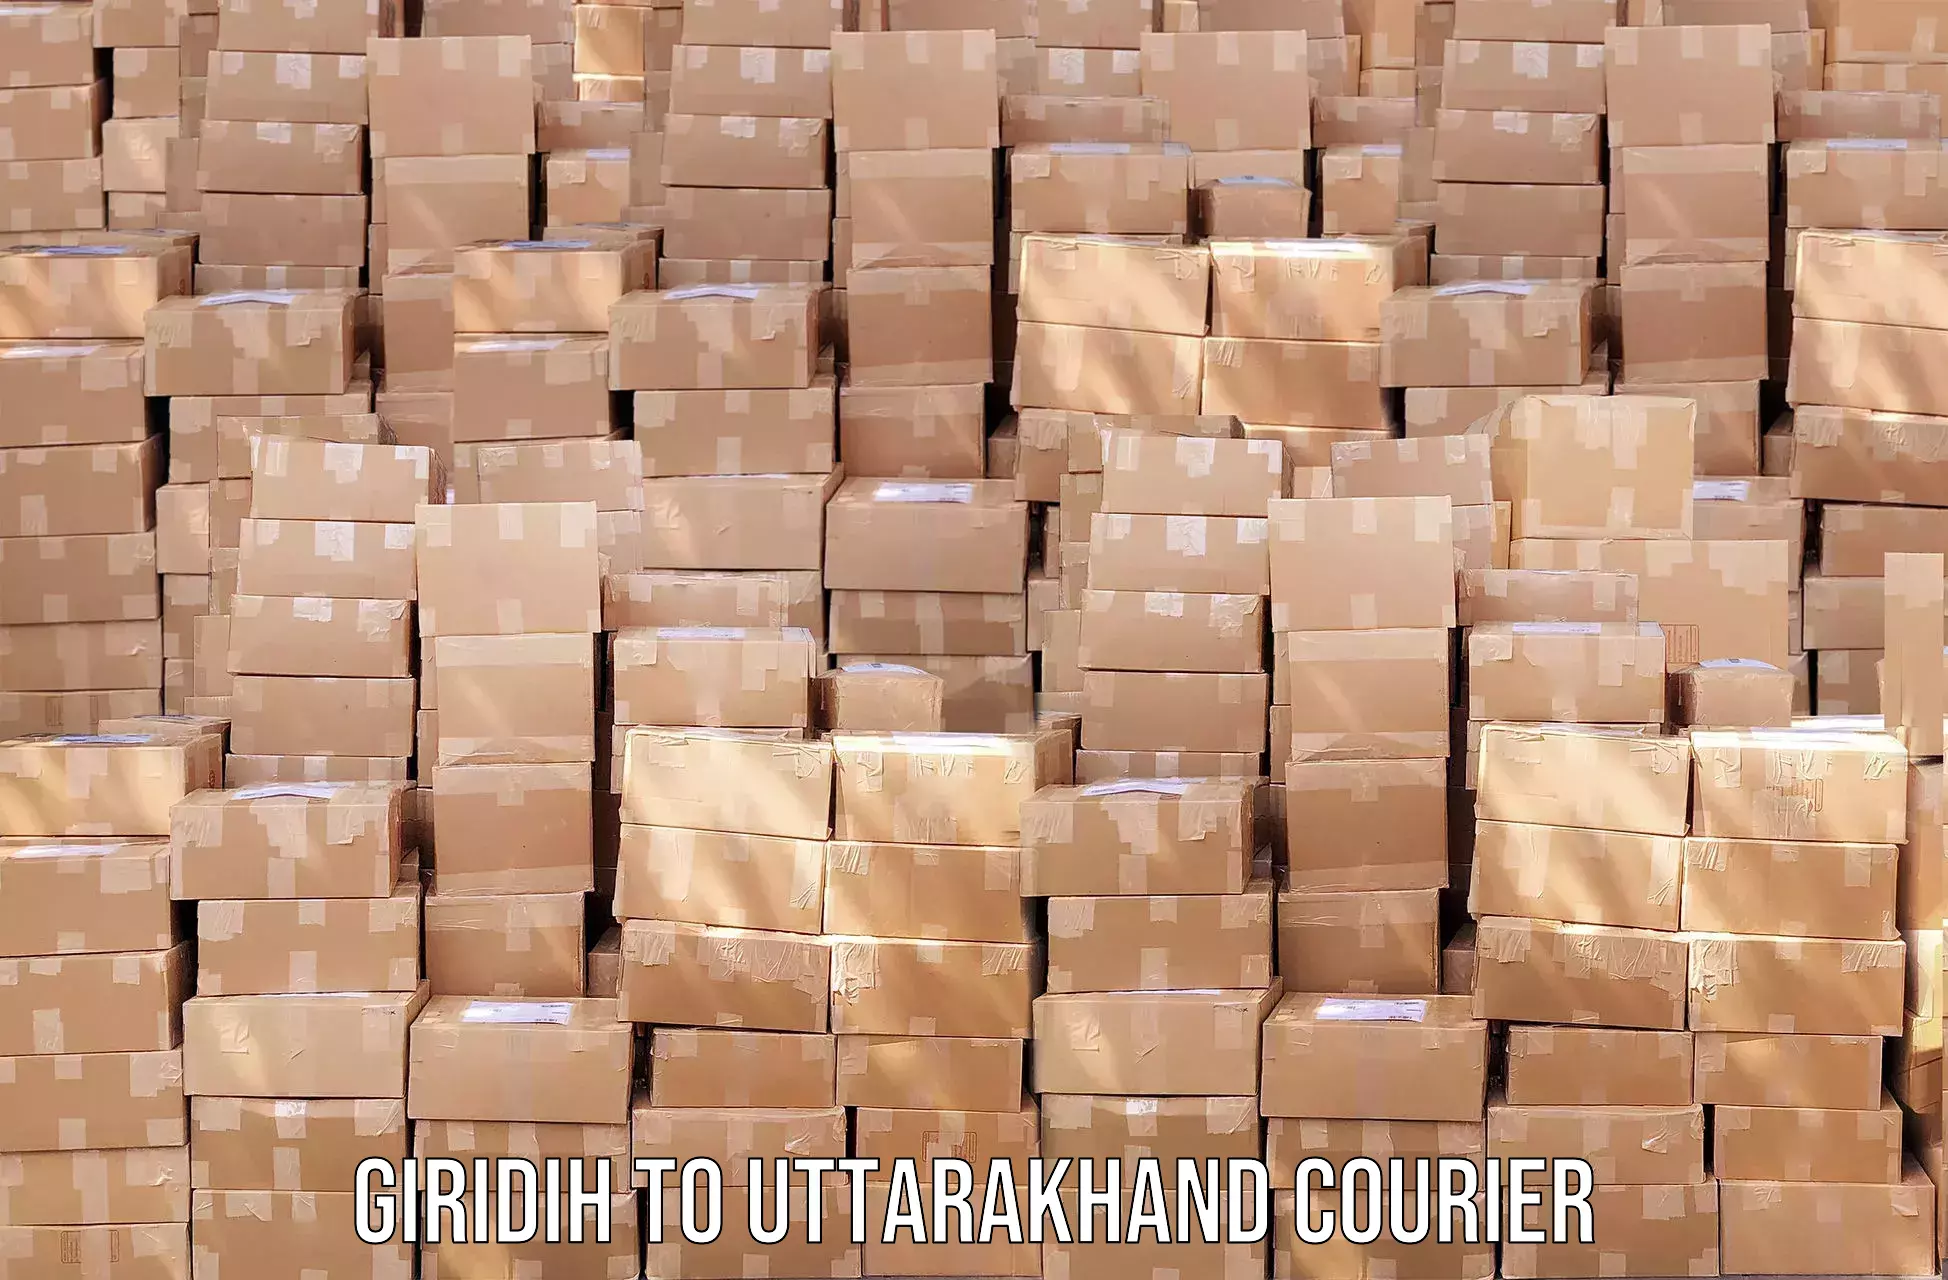 Reliable delivery network Giridih to Dwarahat